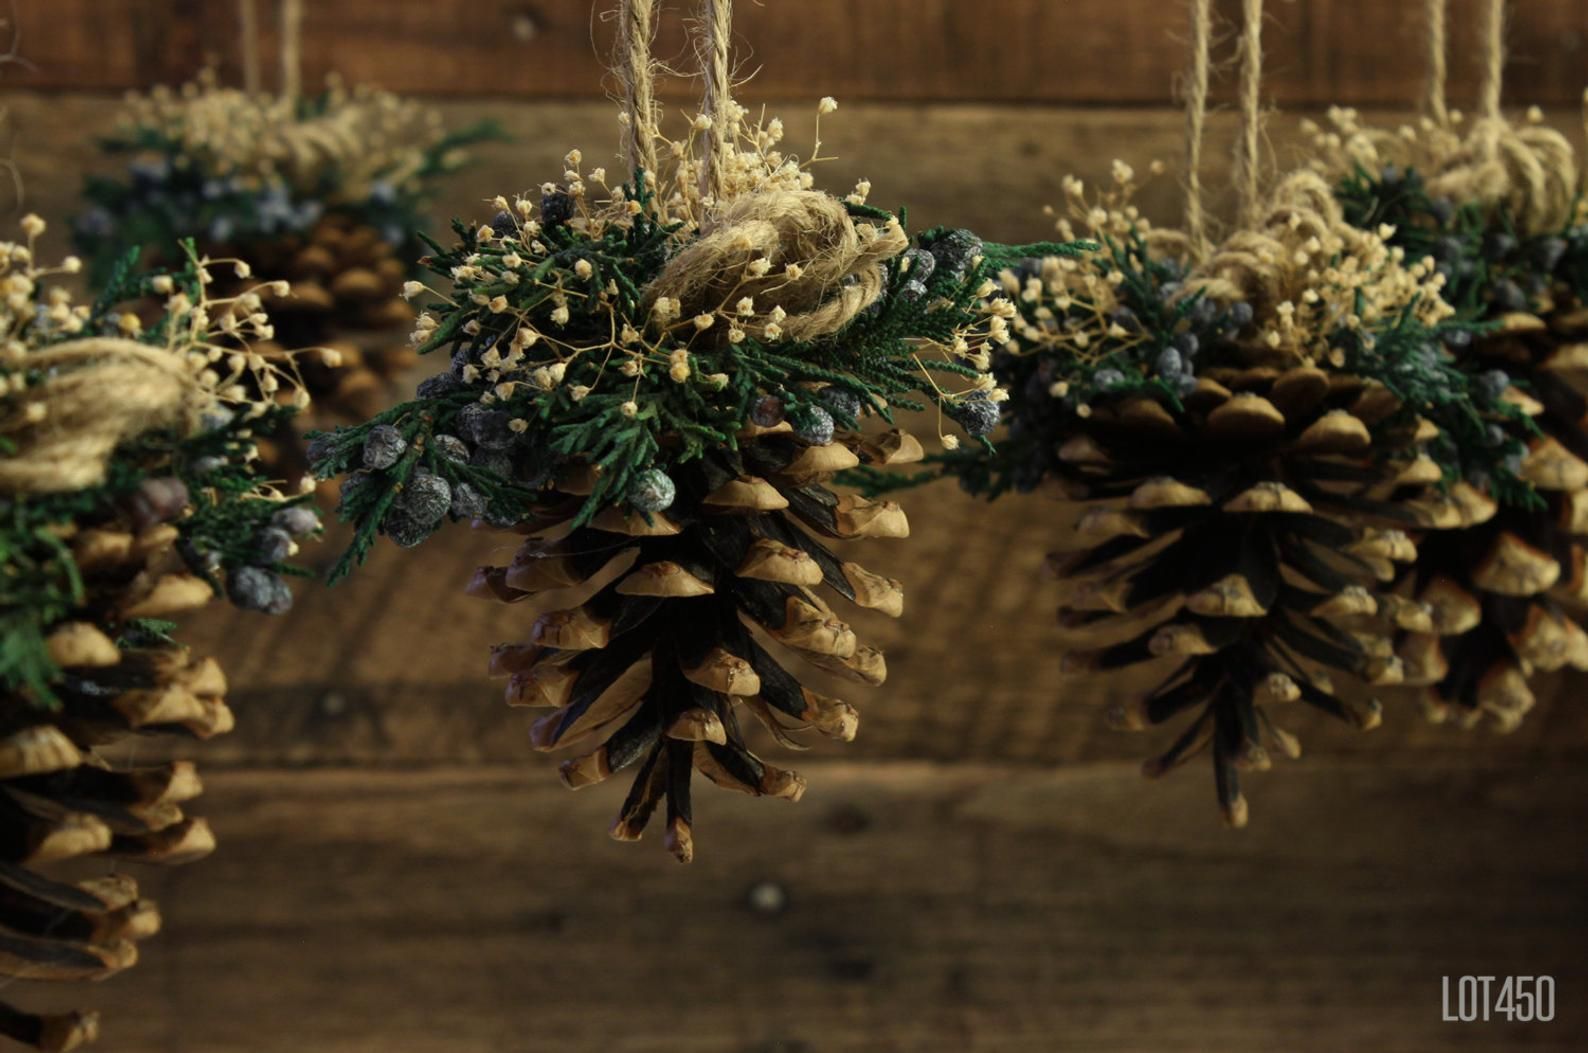 Christmas Decorations, Christmas Tree Ornament, Pine Cone Ornament, Natural Rustic Woodland Holiday Decor, Preserved Evergreens, Dry Flower -   18 rustic tree topper pine cones ideas